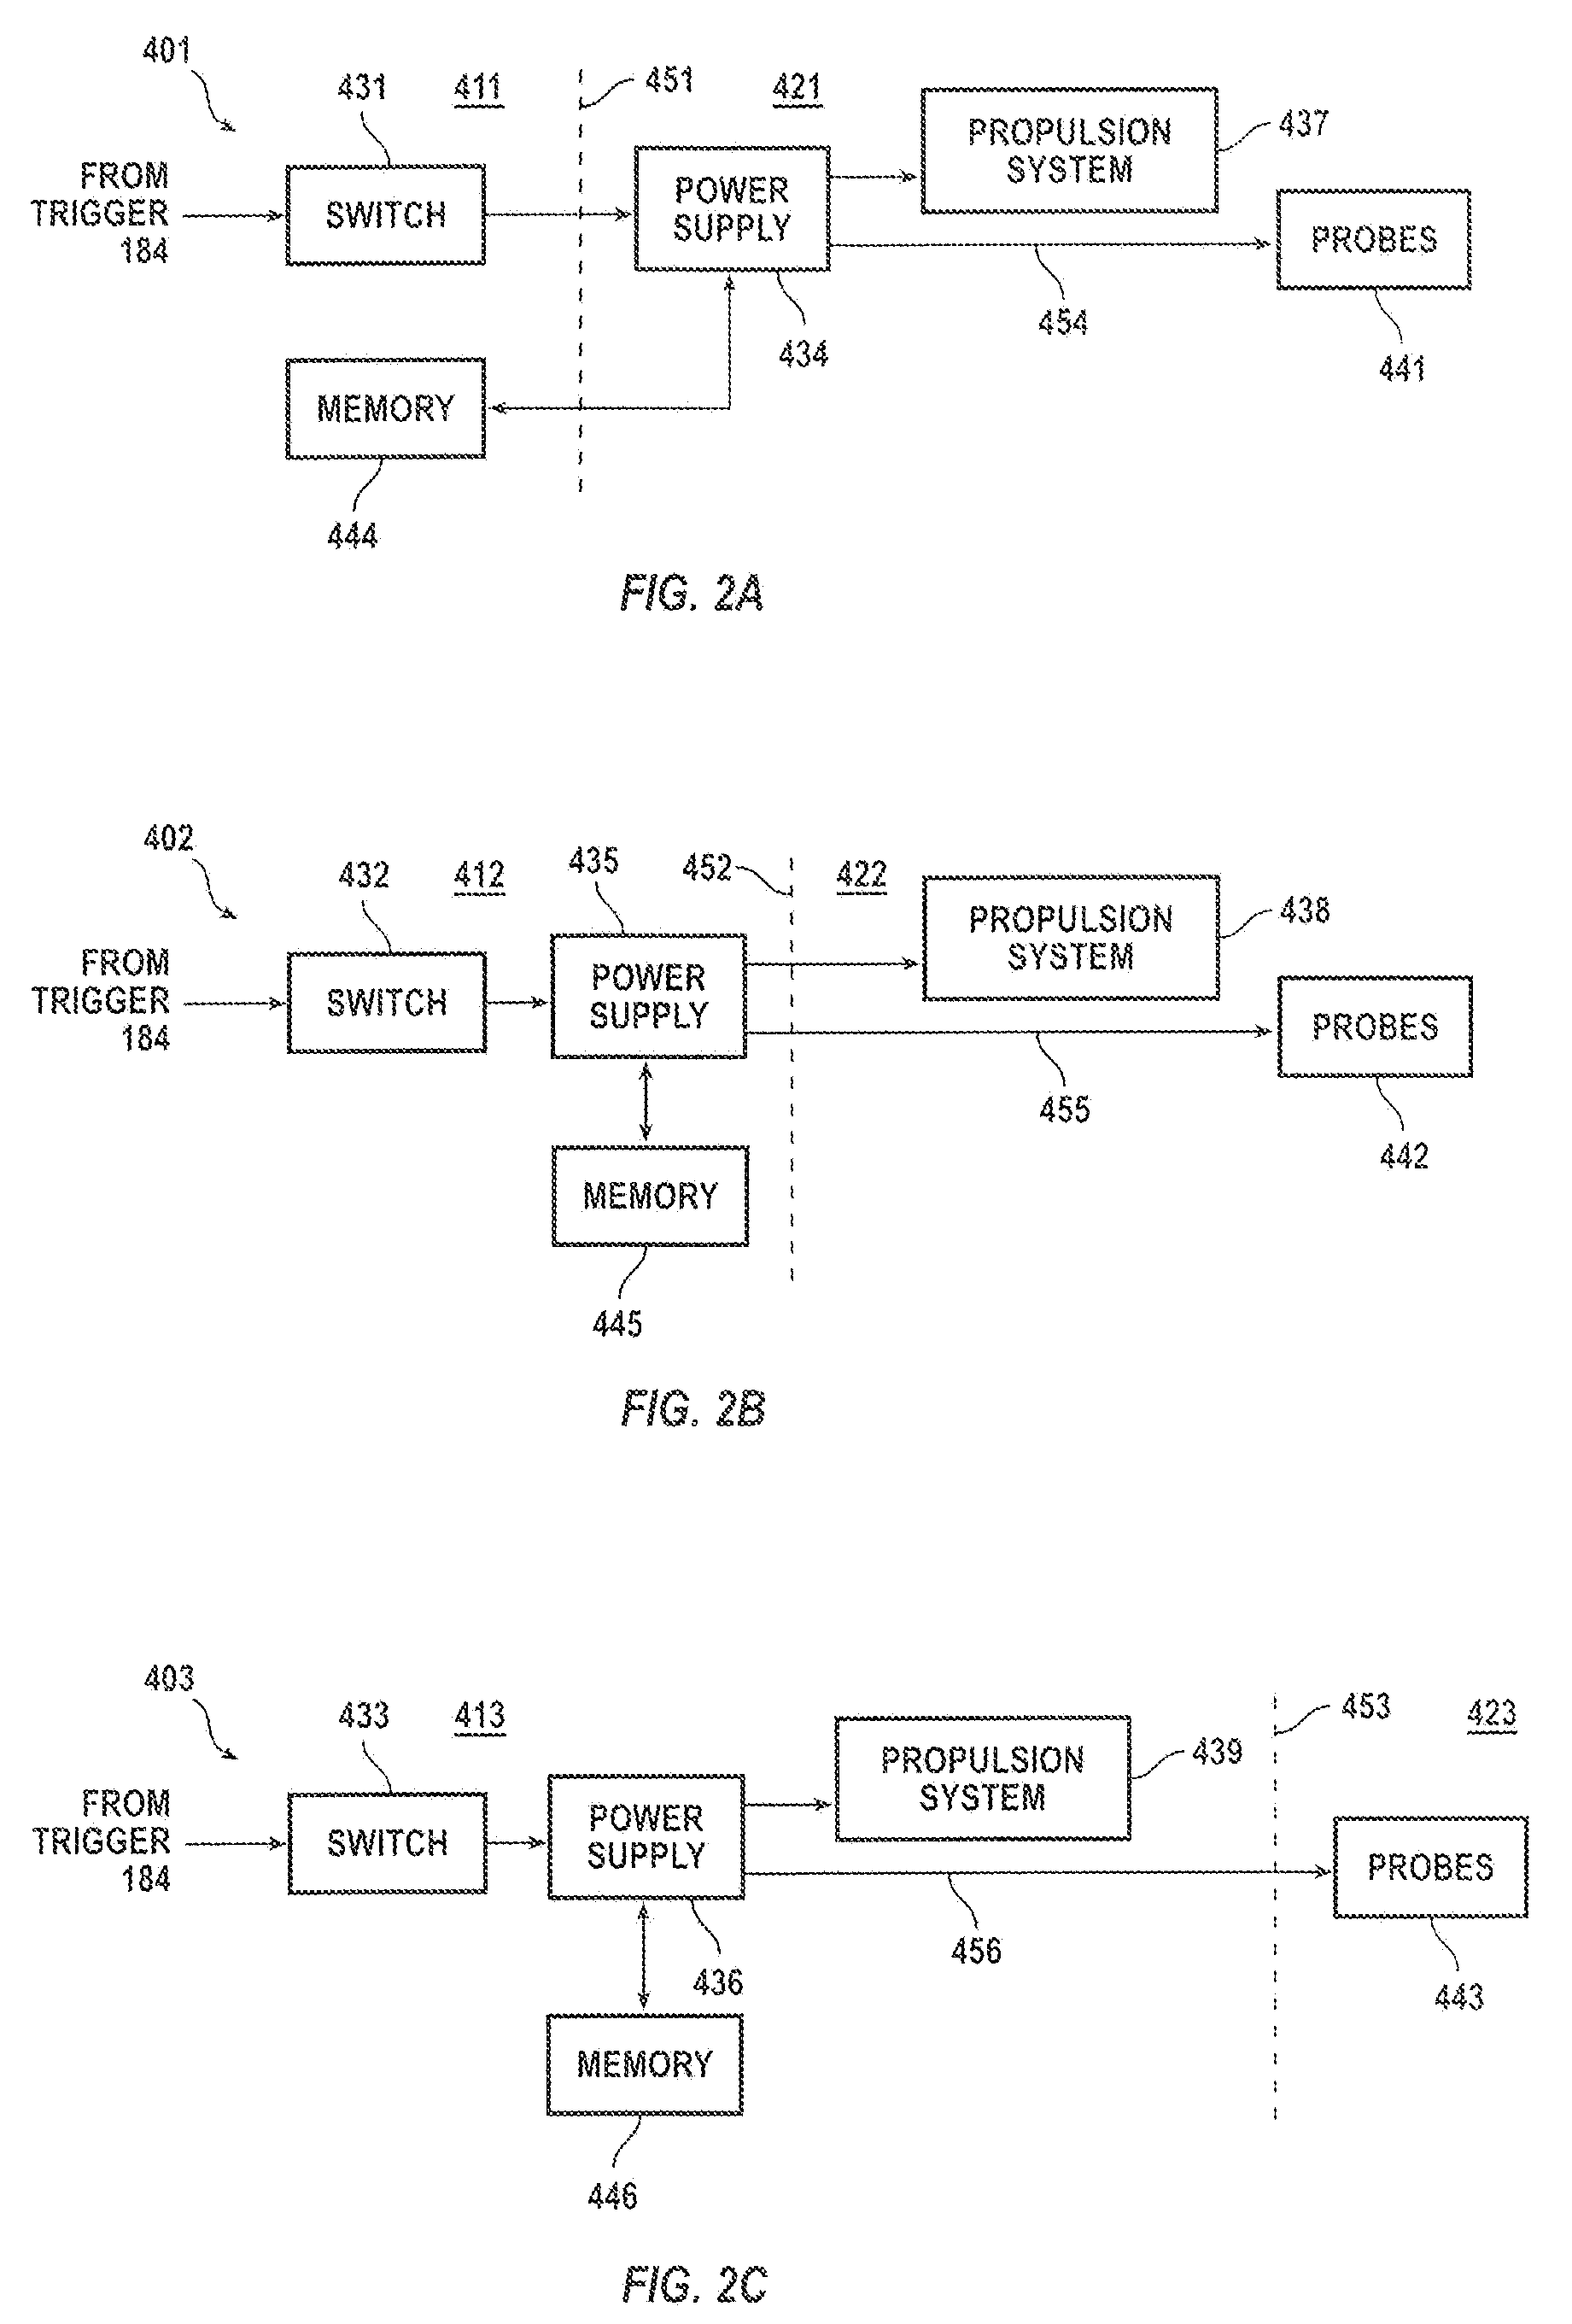 Systems and methods having a power supply in place of a round of ammunition